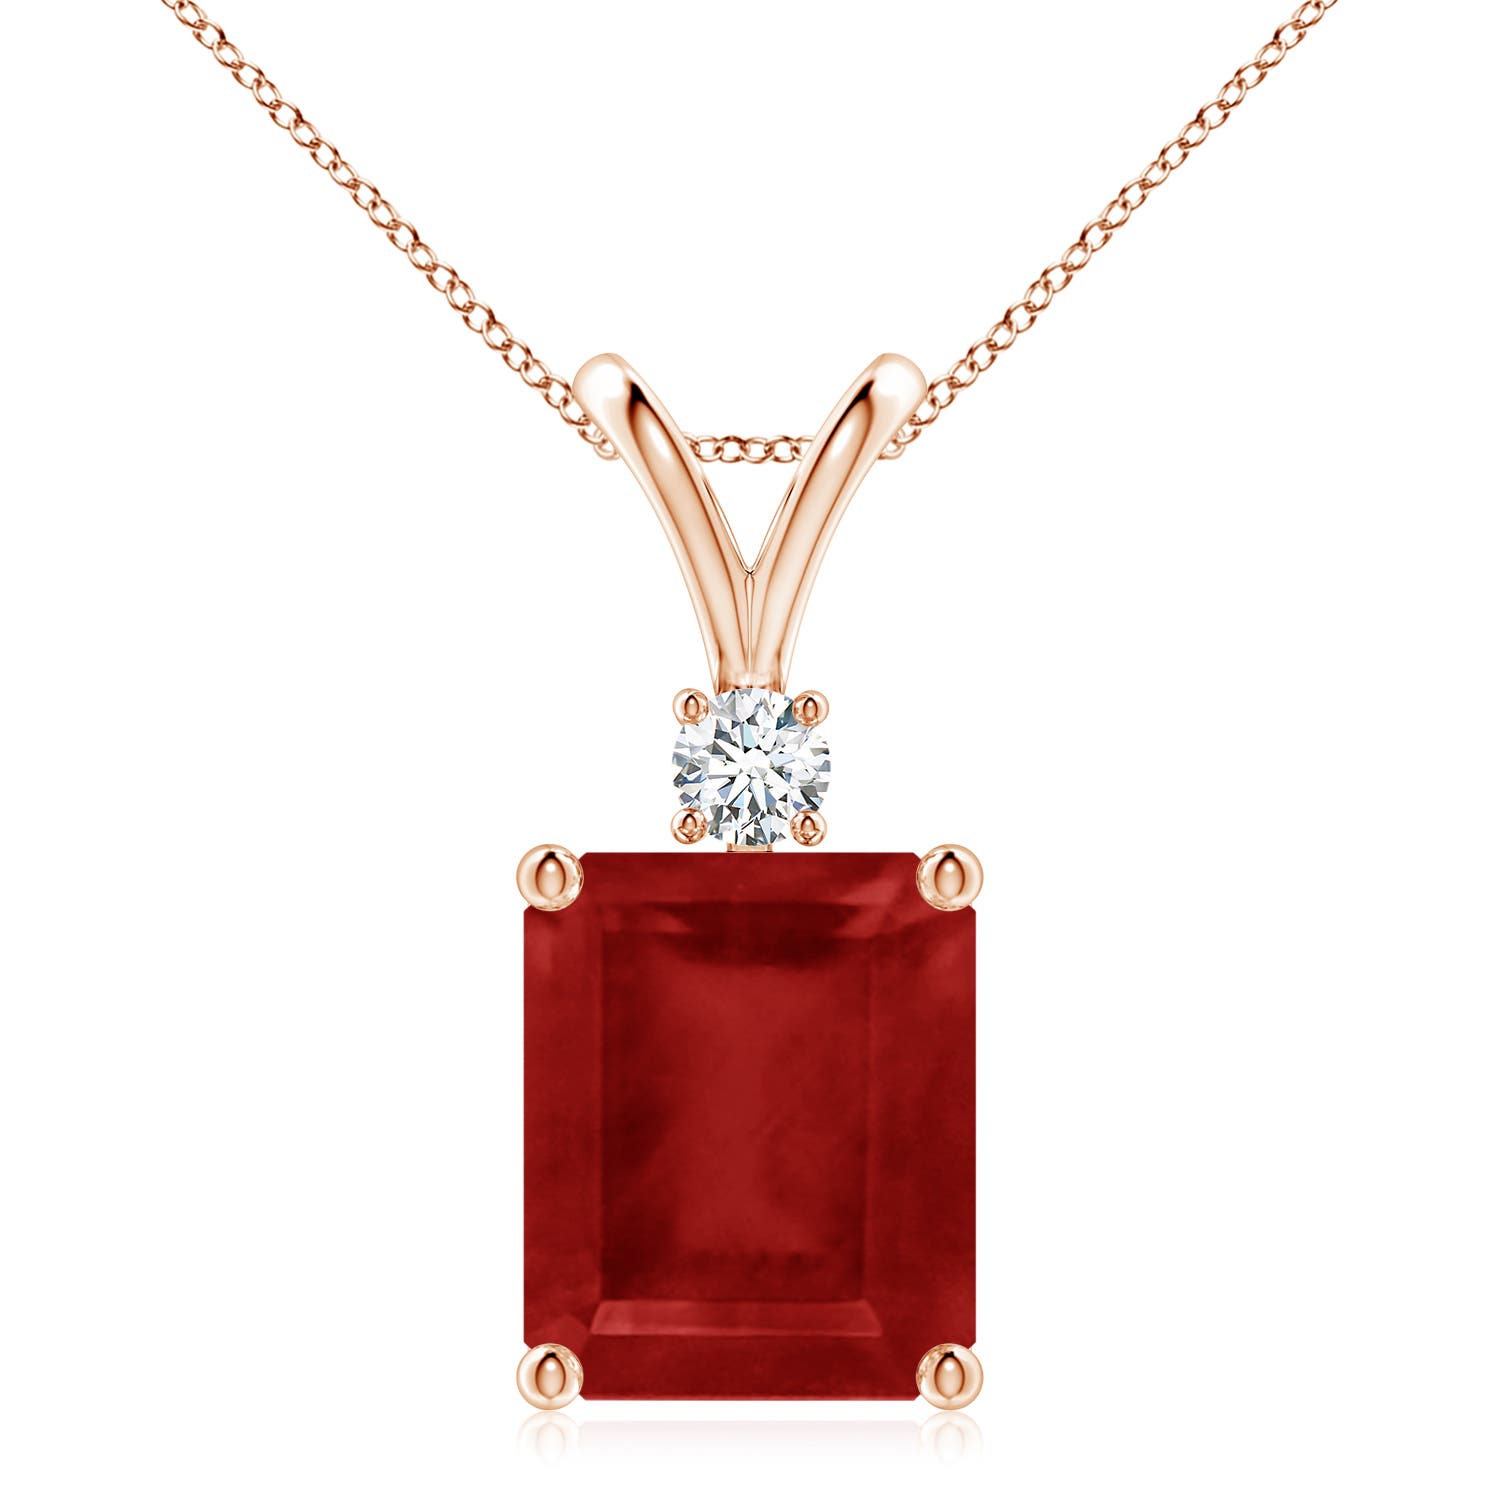 AA - Ruby / 6.41 CT / 14 KT Rose Gold